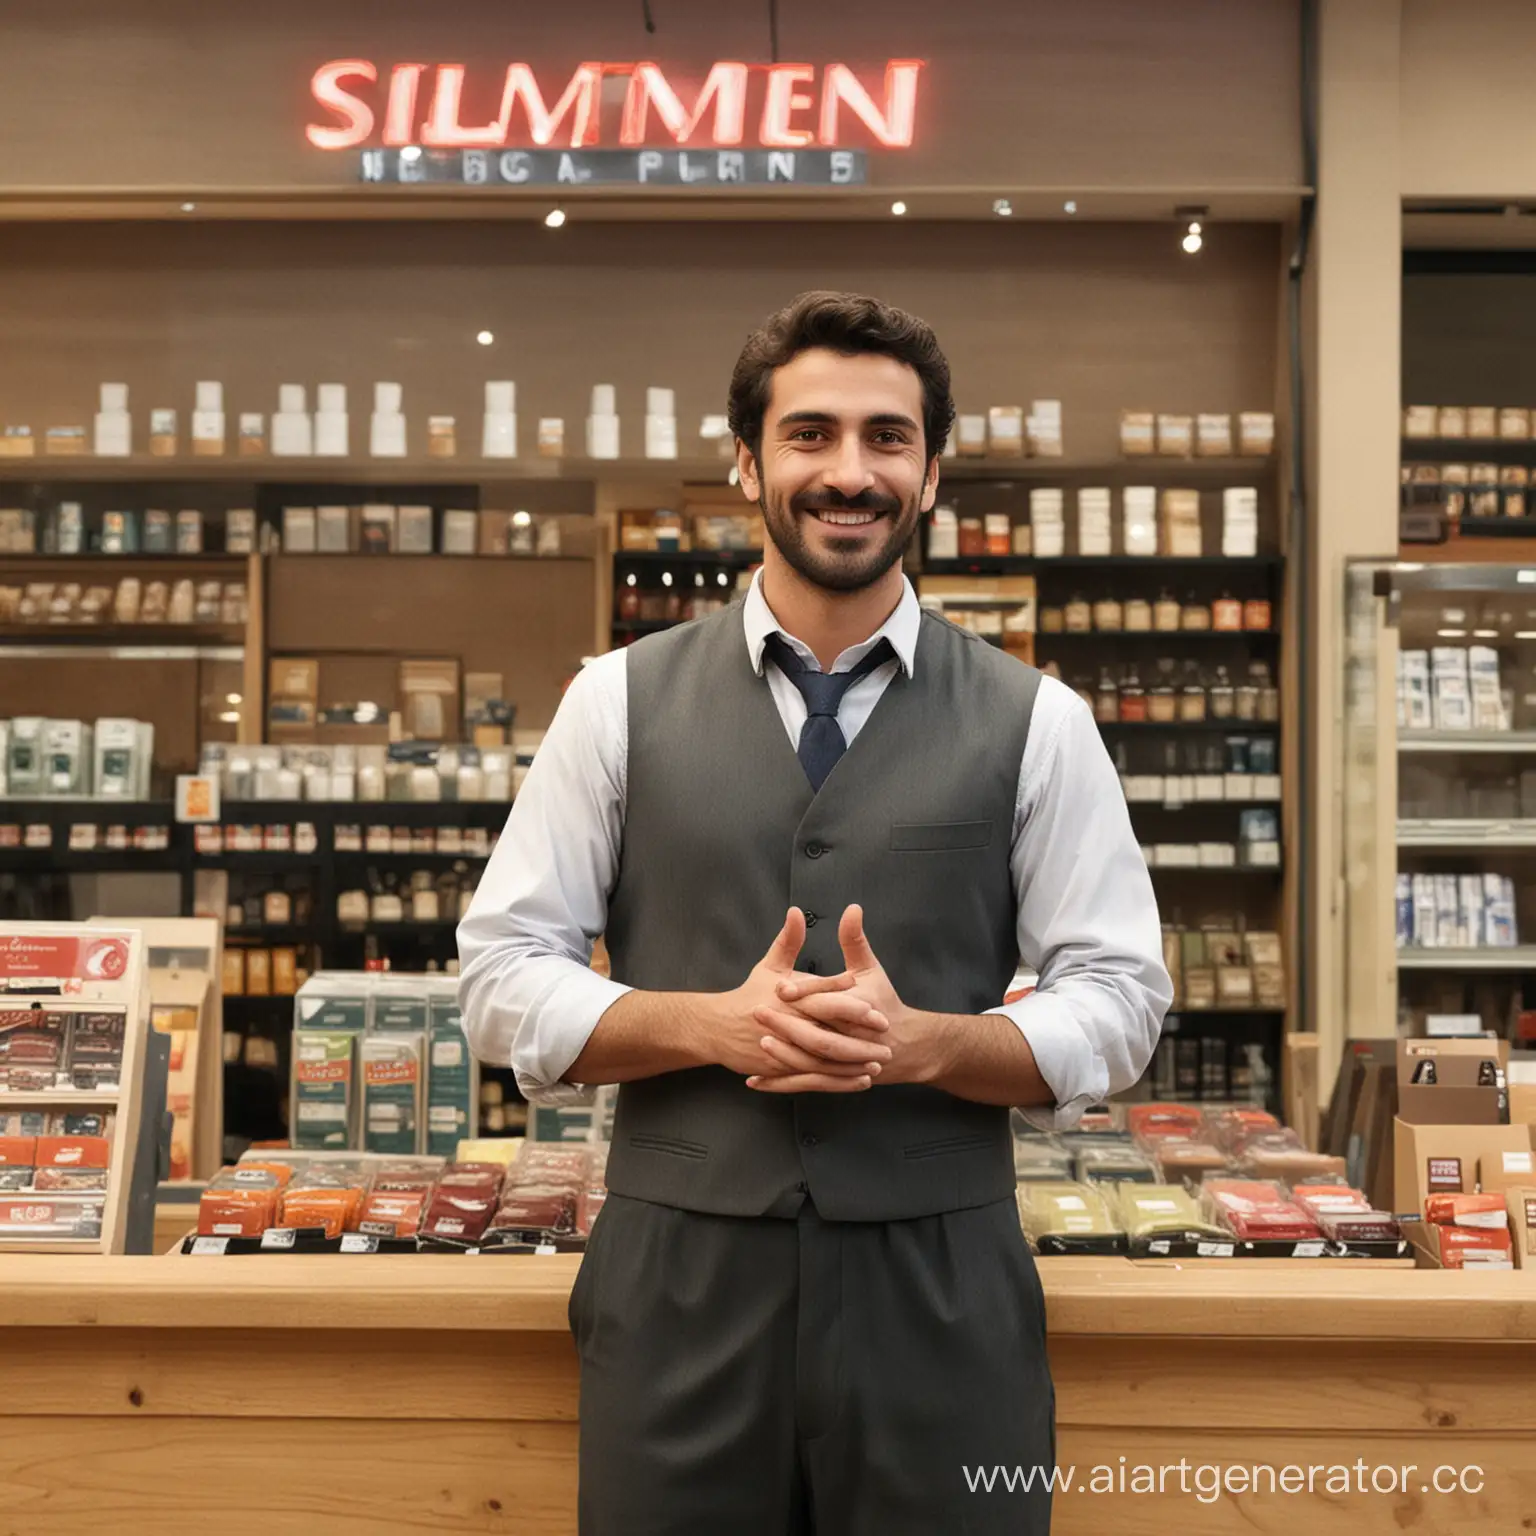 Friendly-Salesman-Presenting-Products-Outside-Unmarked-Storefront